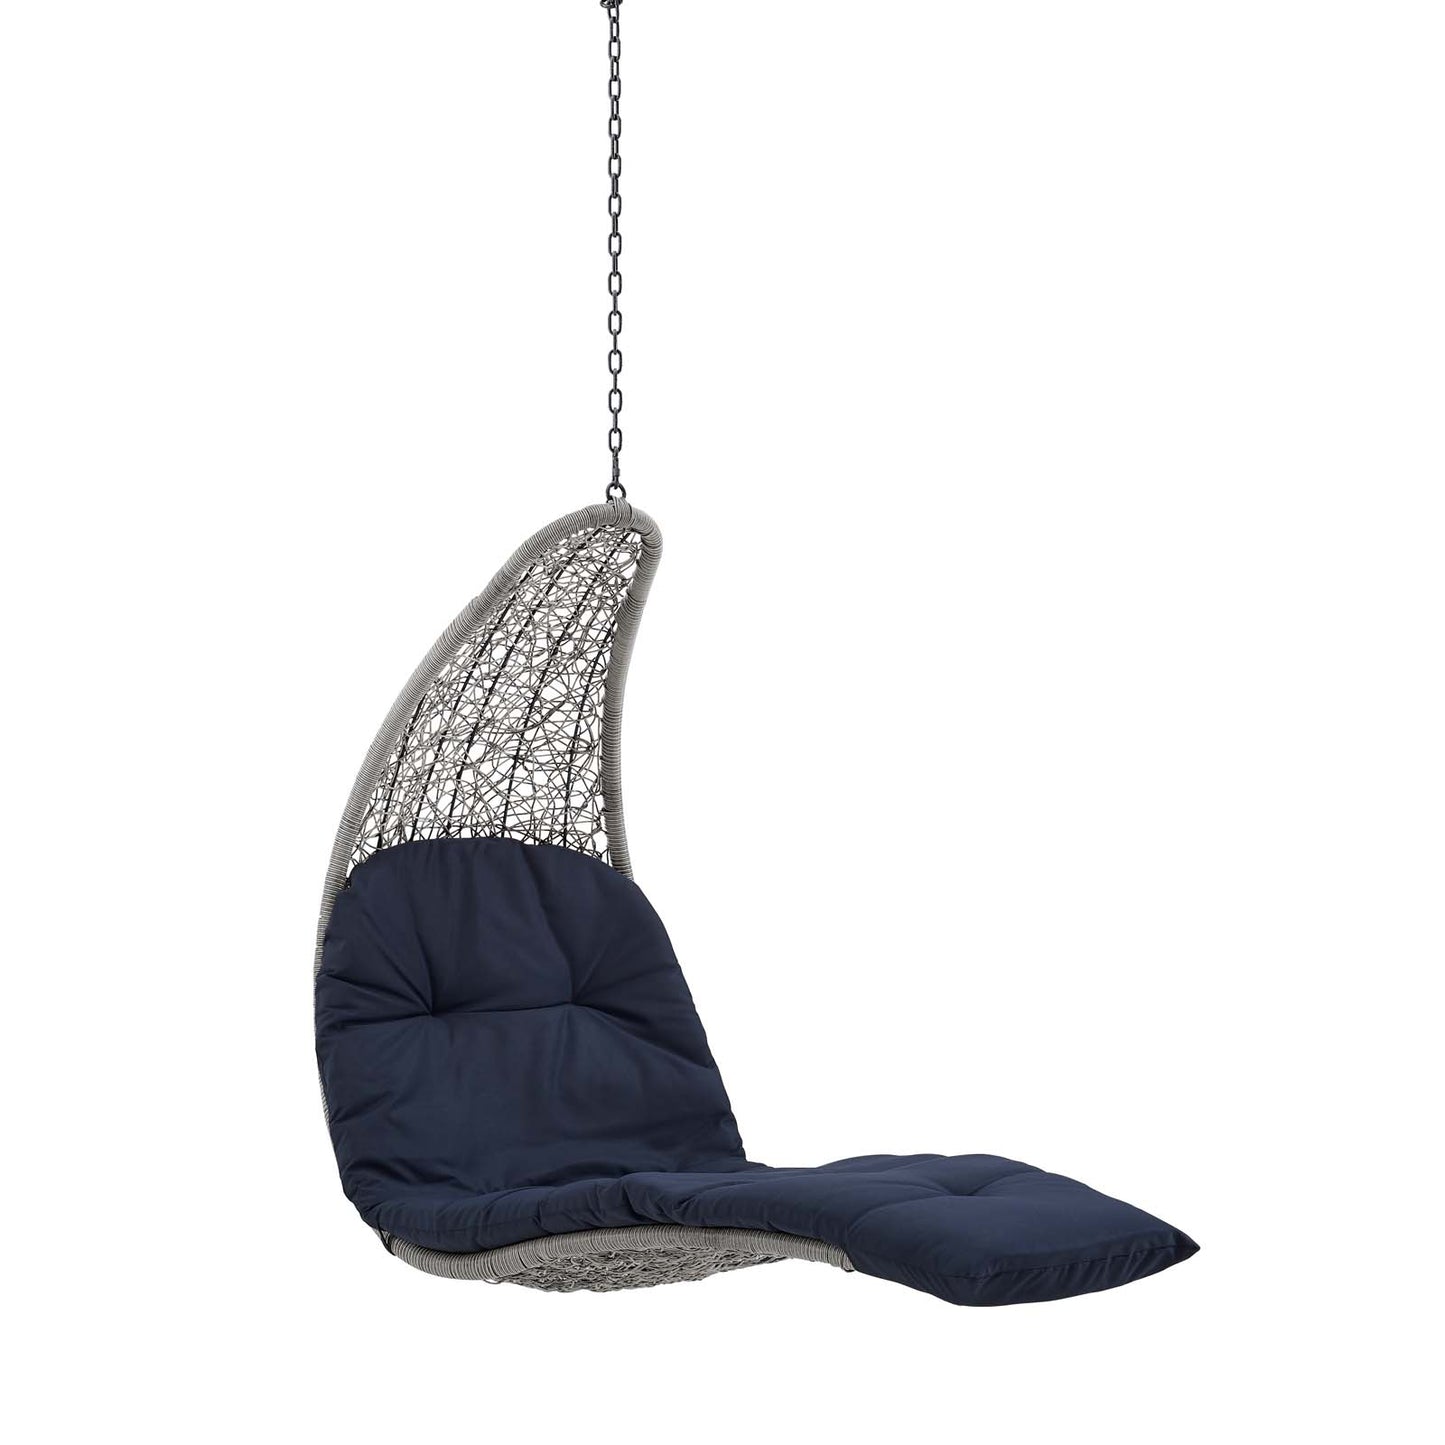 Landscape Hanging Chaise Lounge Outdoor Patio Swing Chair Light Gray Navy EEI-4589-LGR-NAV